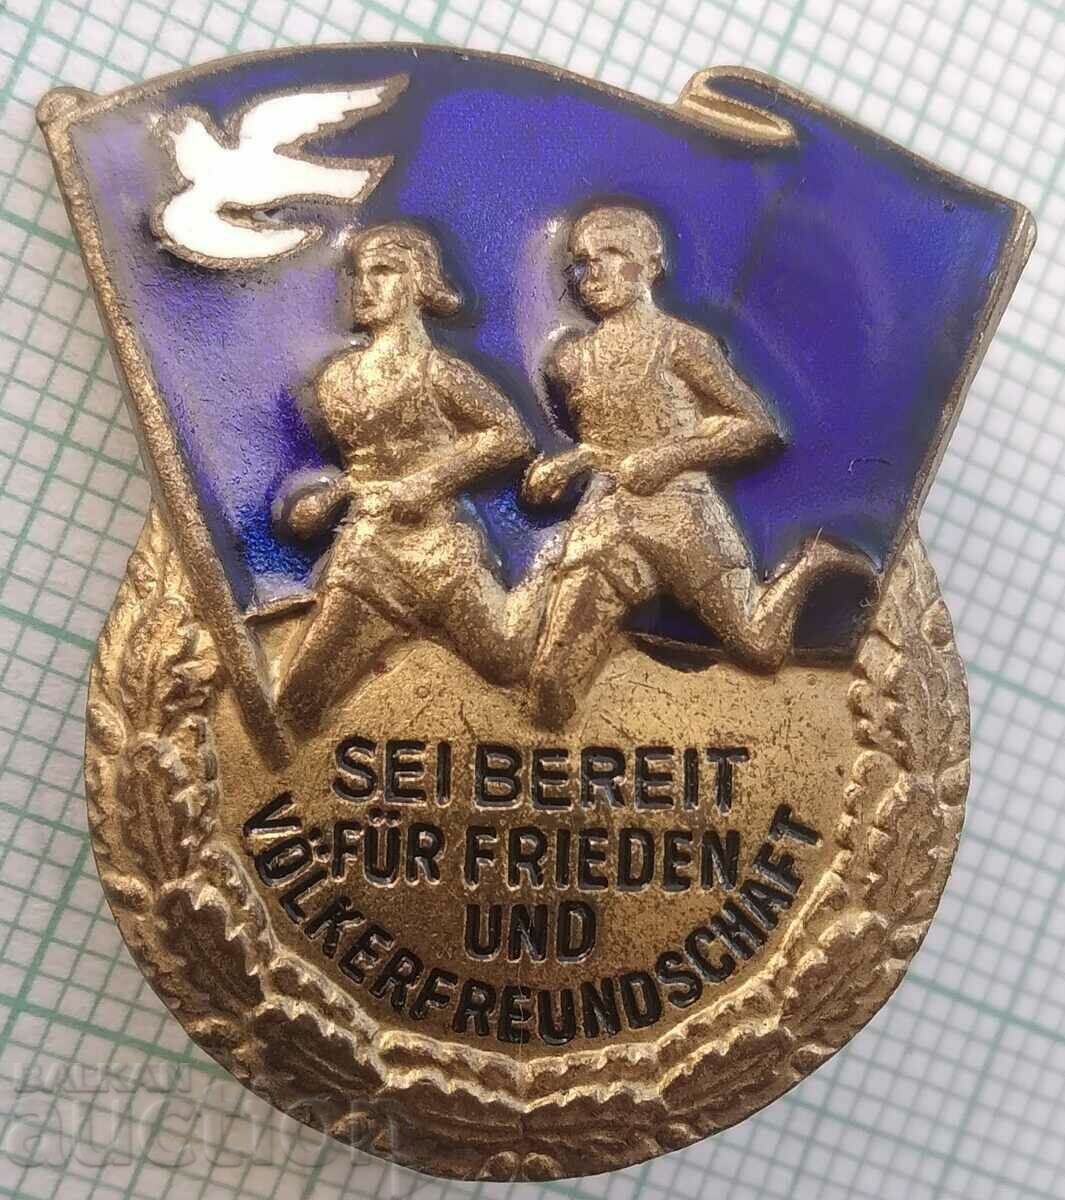 14703 Germany "Be ready for peace and friendship" - enamel